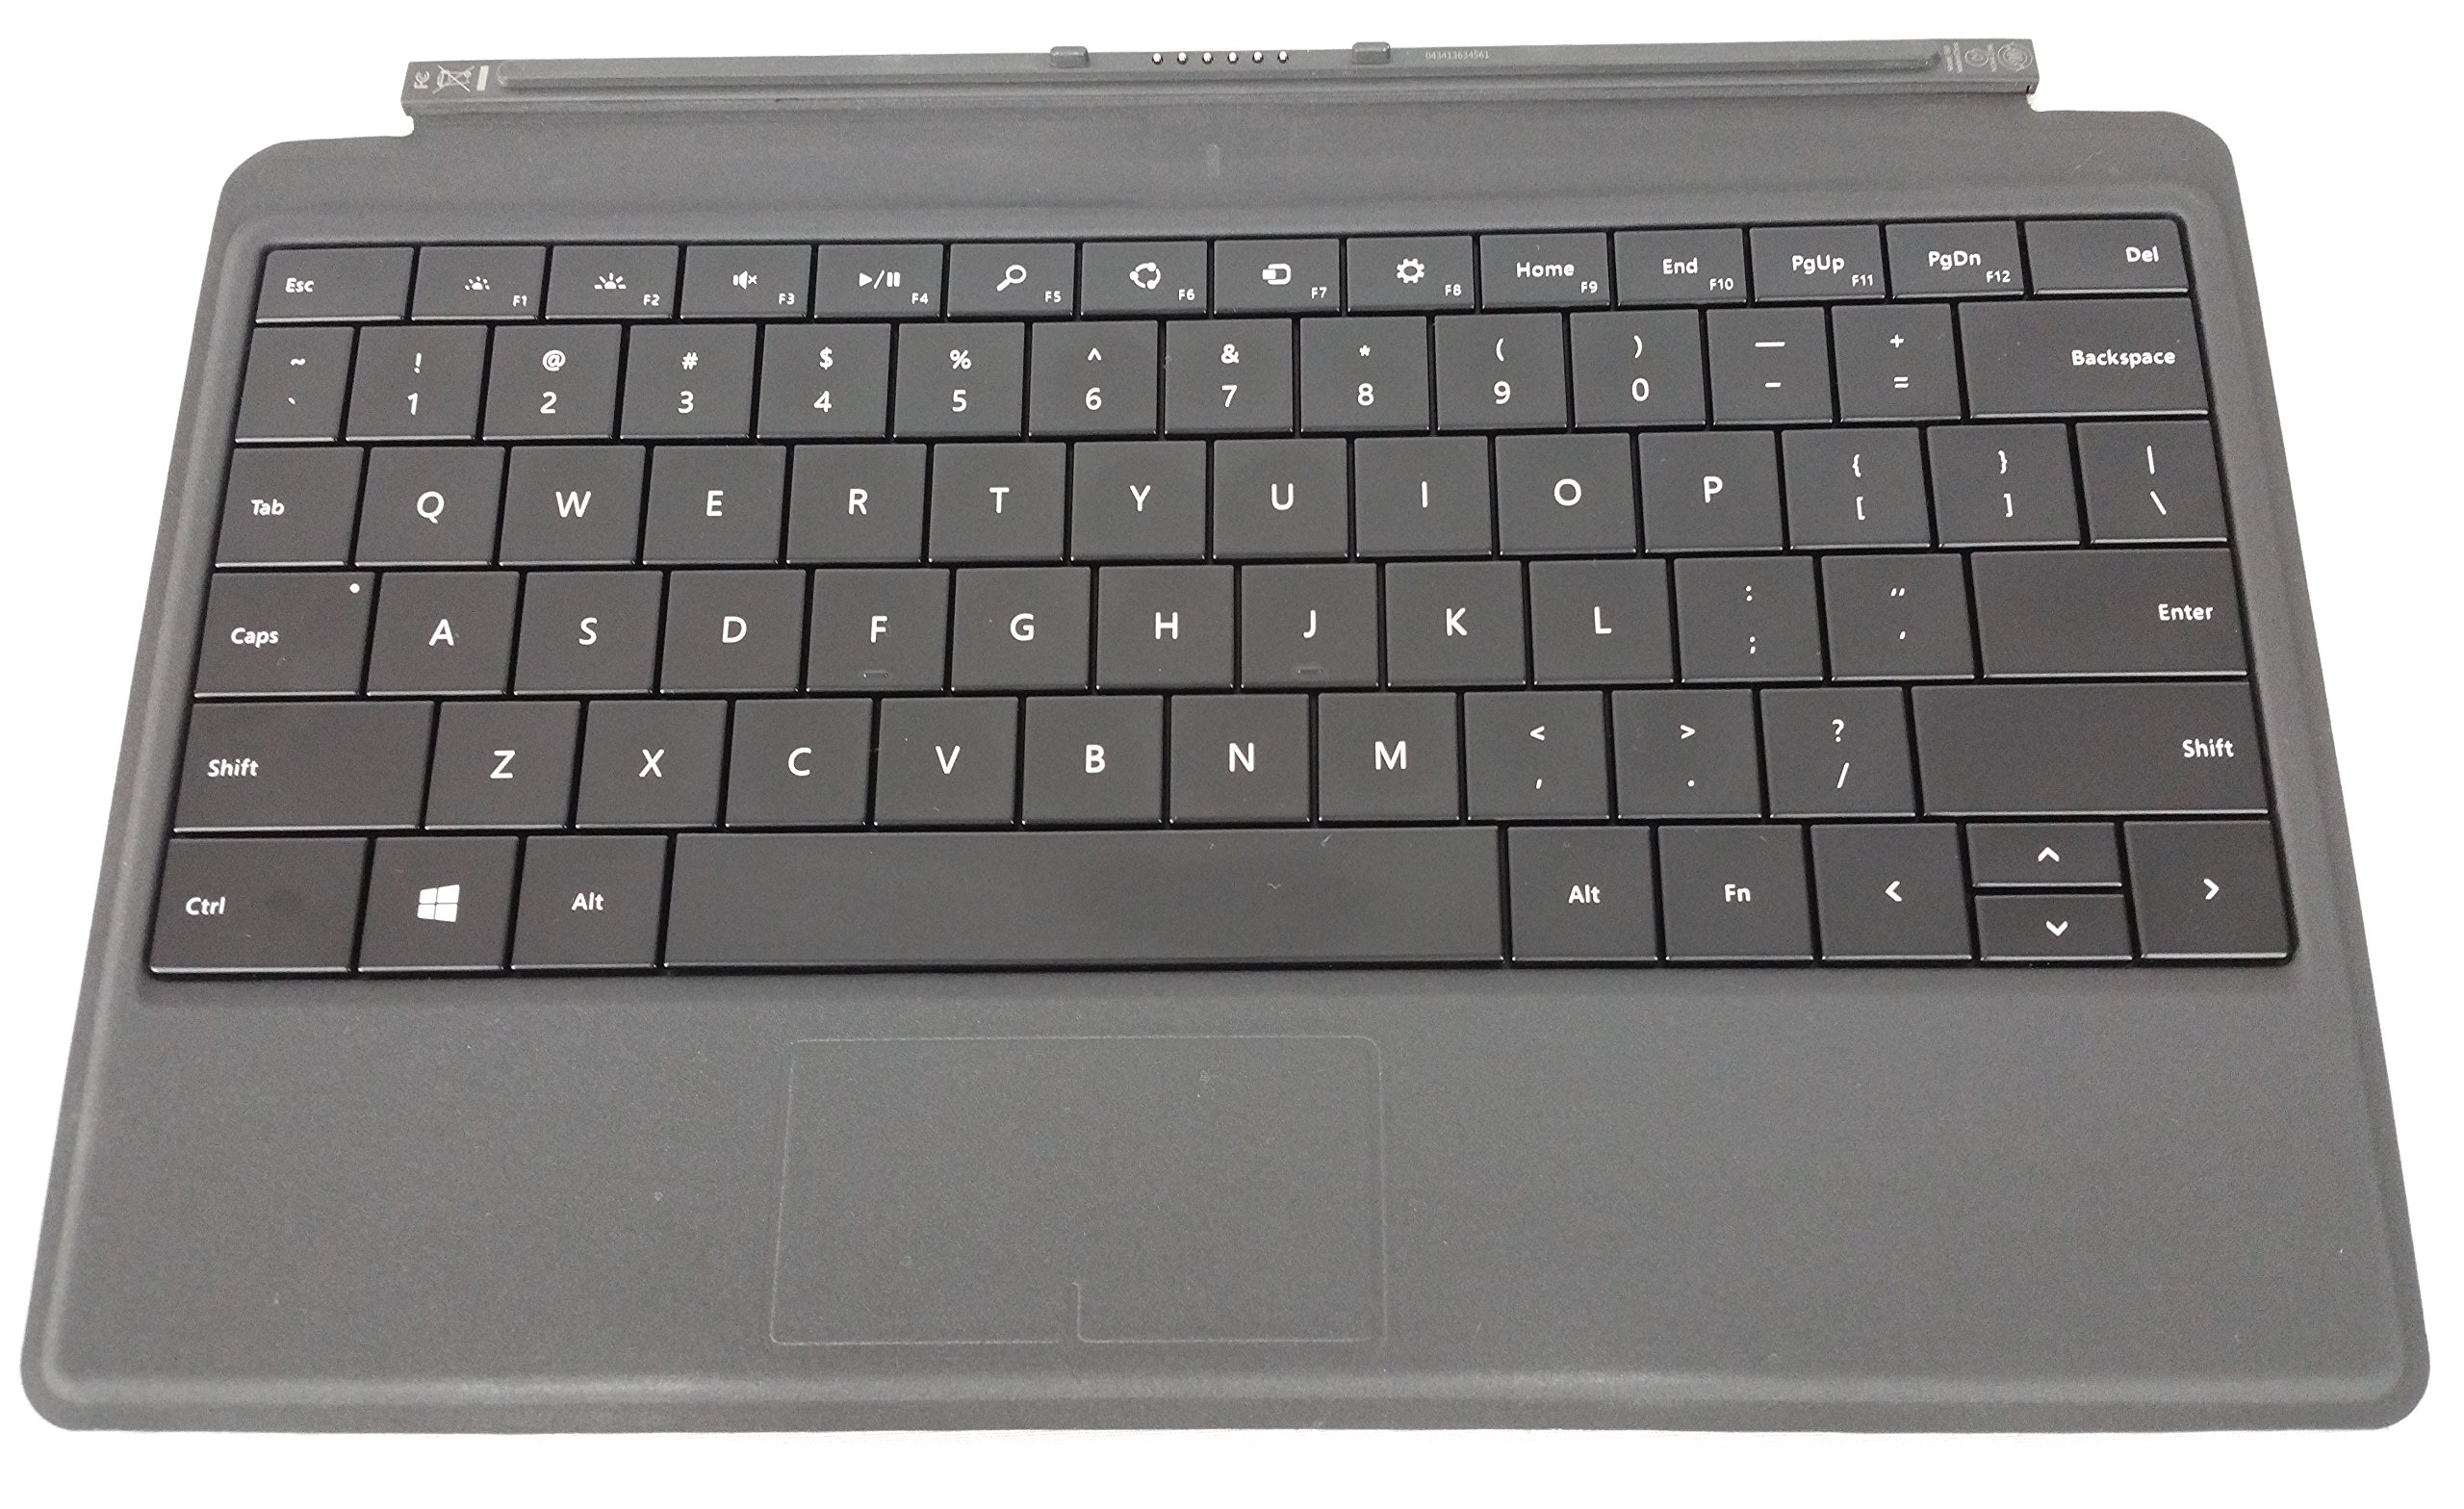 Surface Pro keyboard with power button highlighted